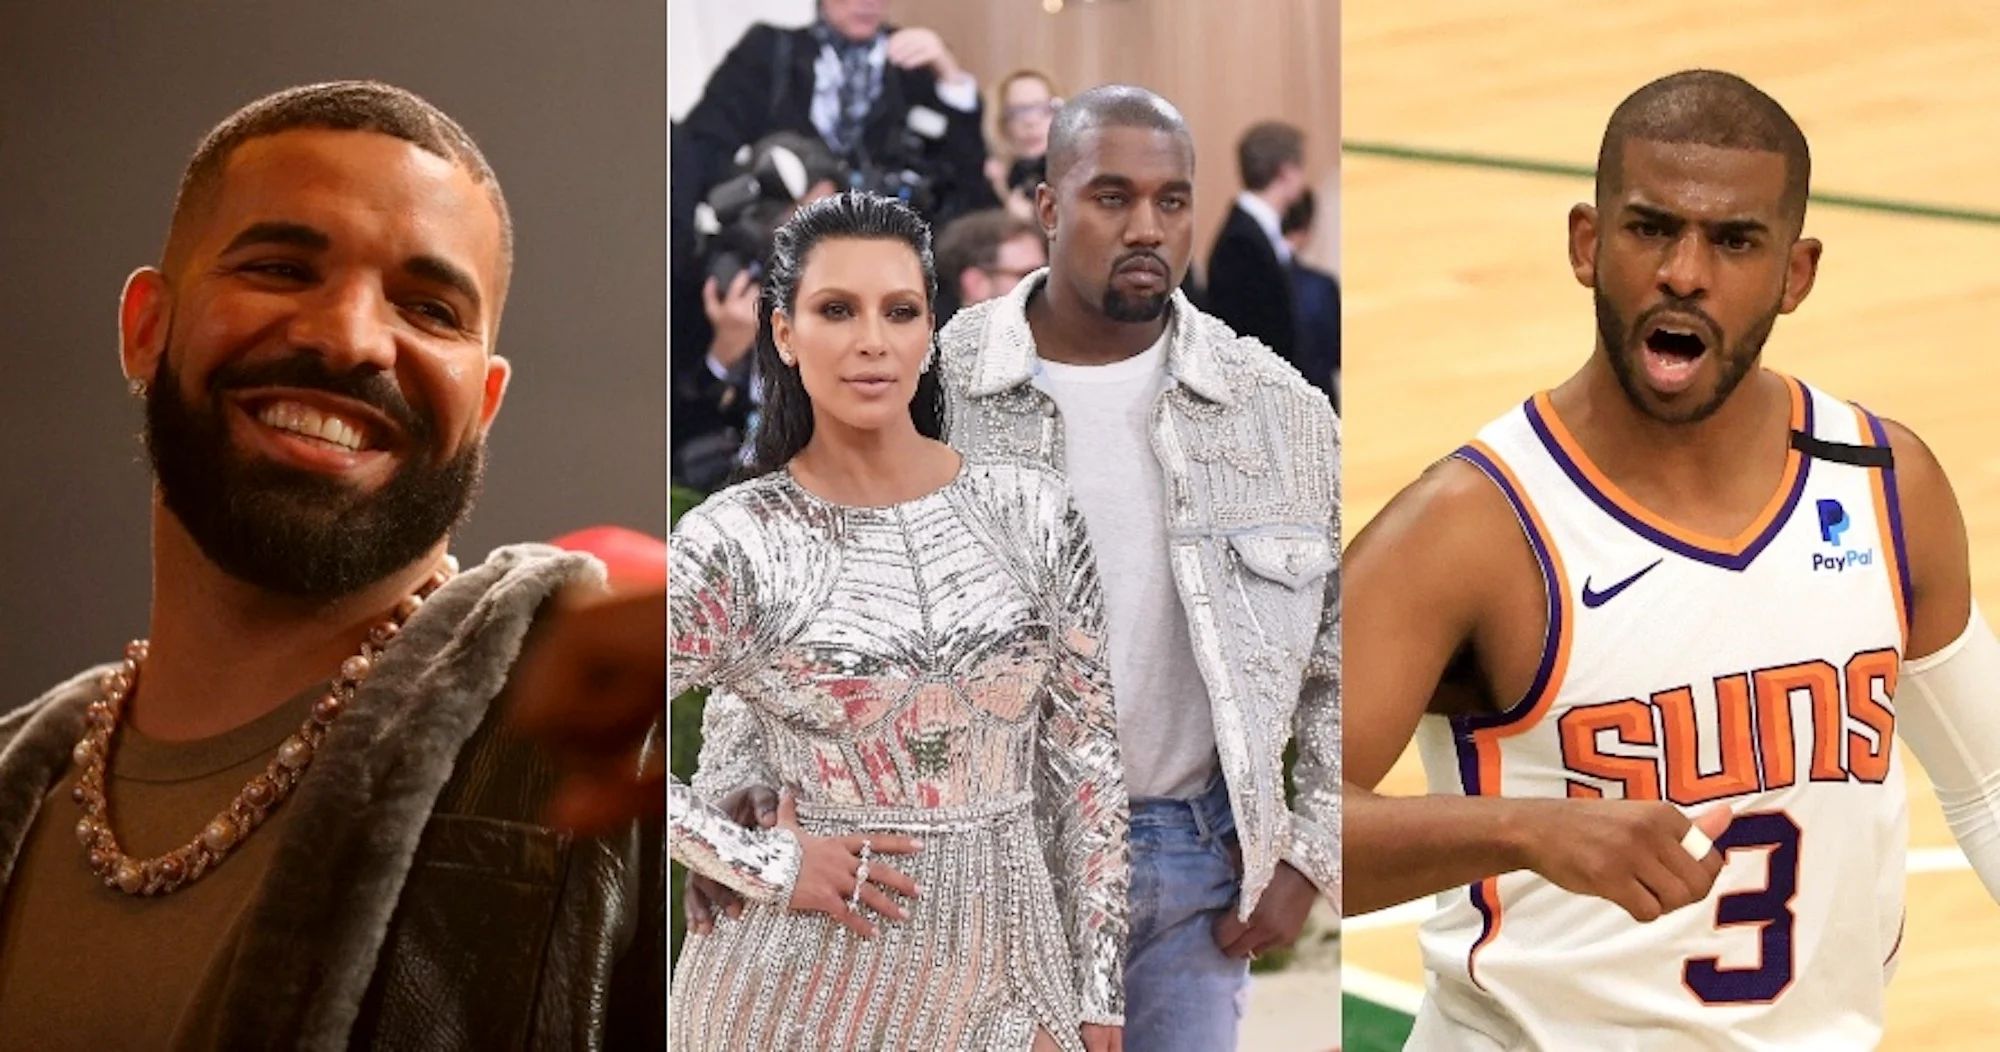 Drake appears to troll Kanye over Kim Kardashian and Chris Paul cheating allegations